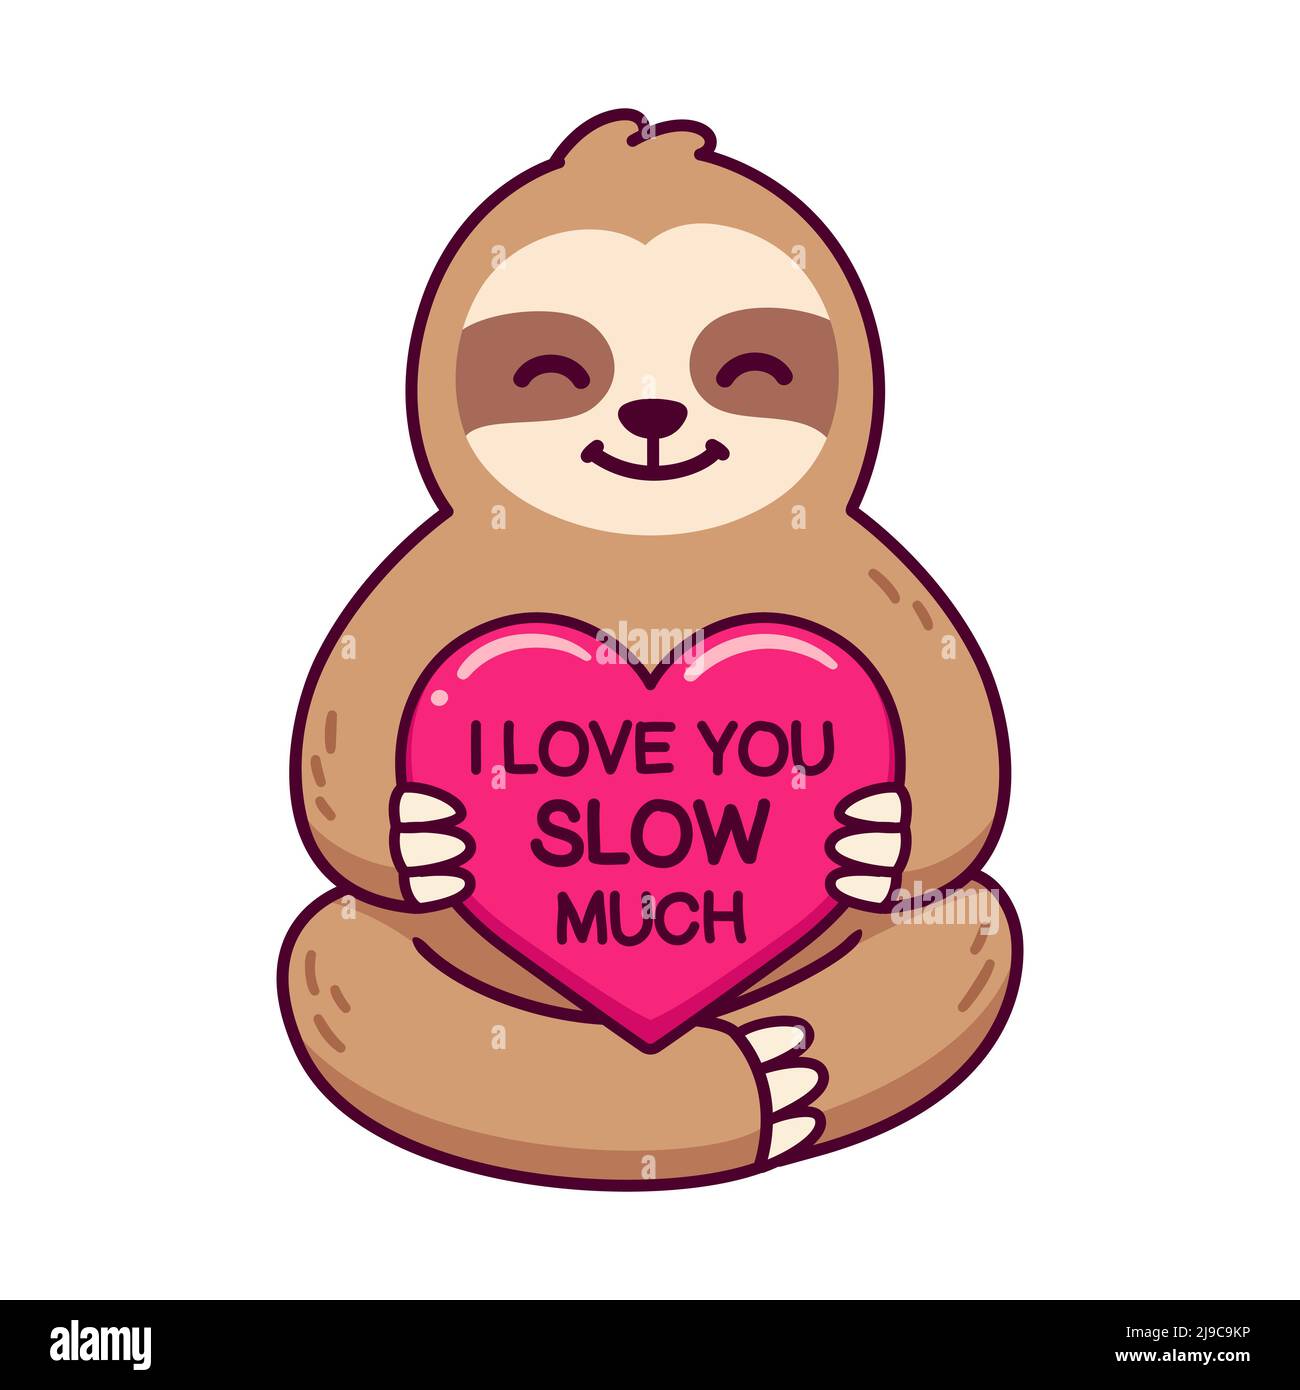 Funny cartoon sloth holding red heart saying I Love You Slow Much. Cute Valentine pun drawing, vector illustration. Stock Vector